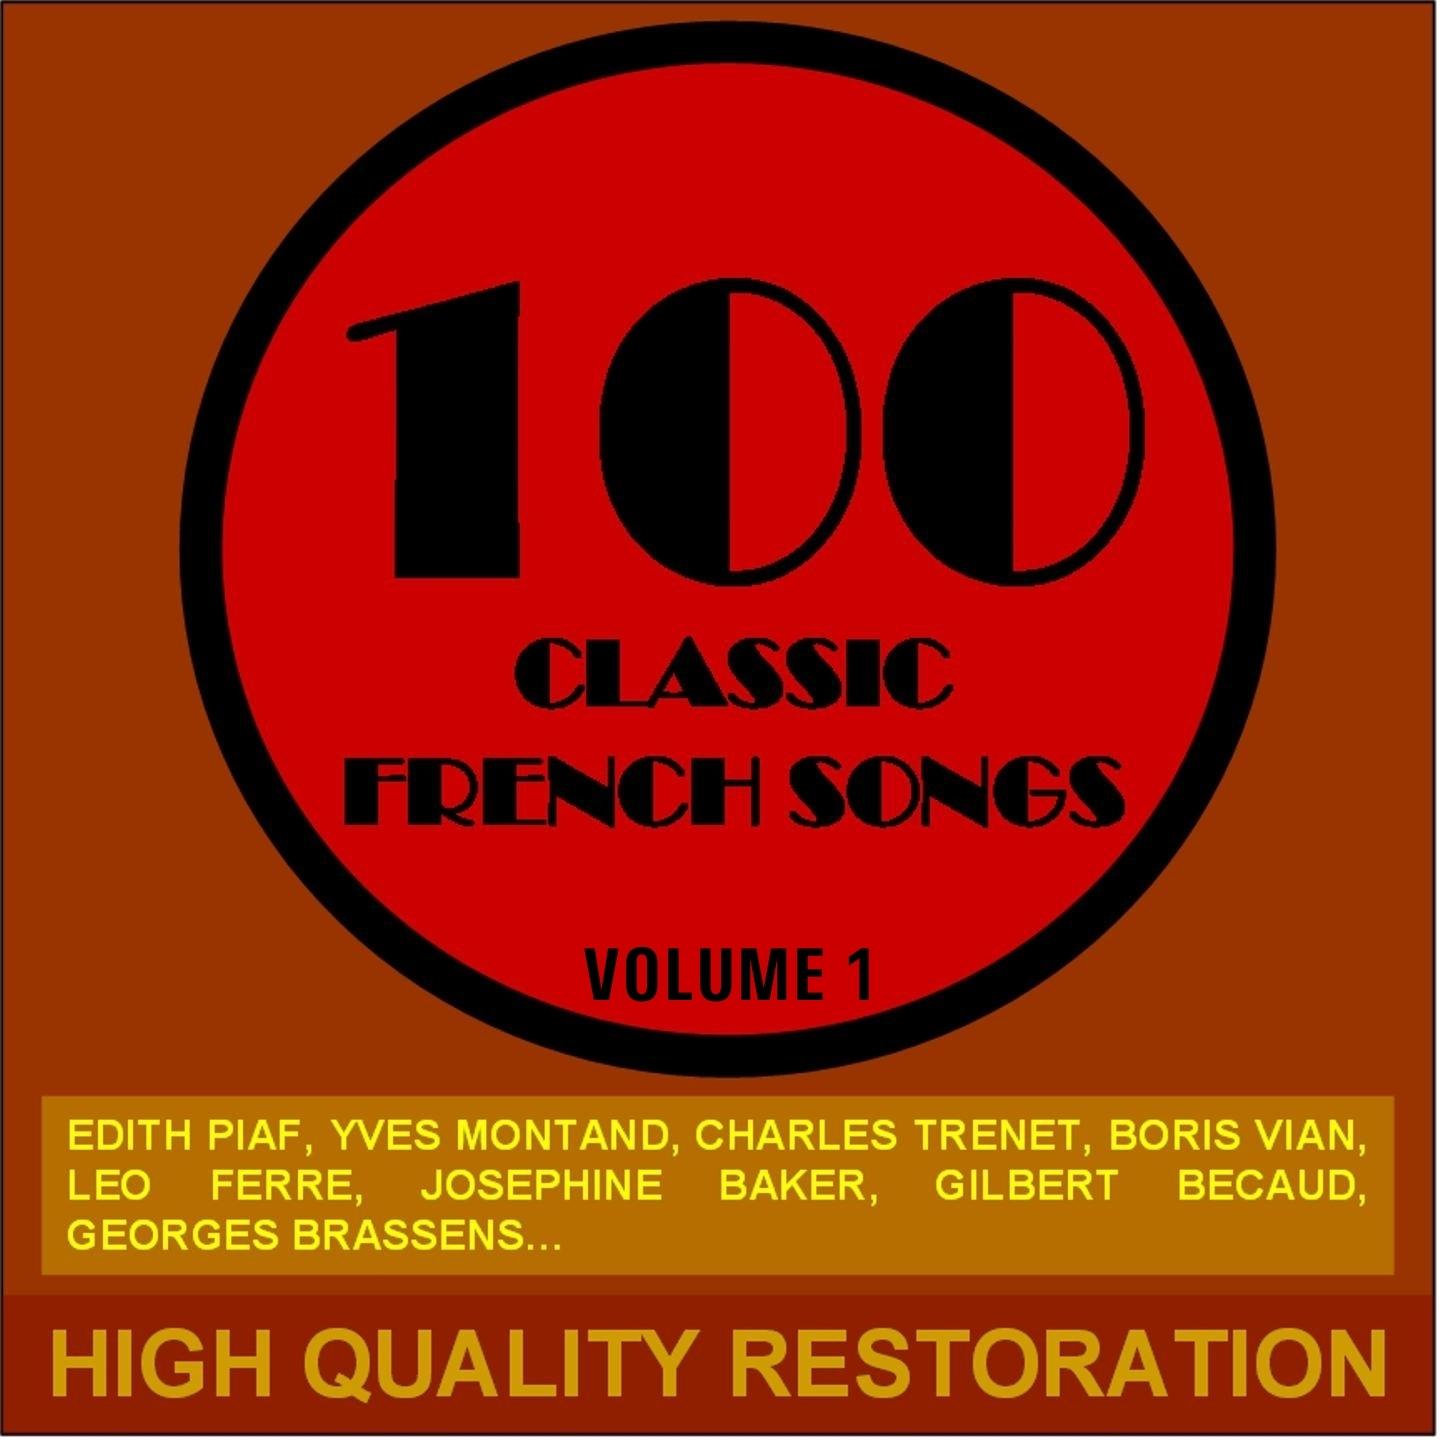 100 Classic French Songs (Volume 1)